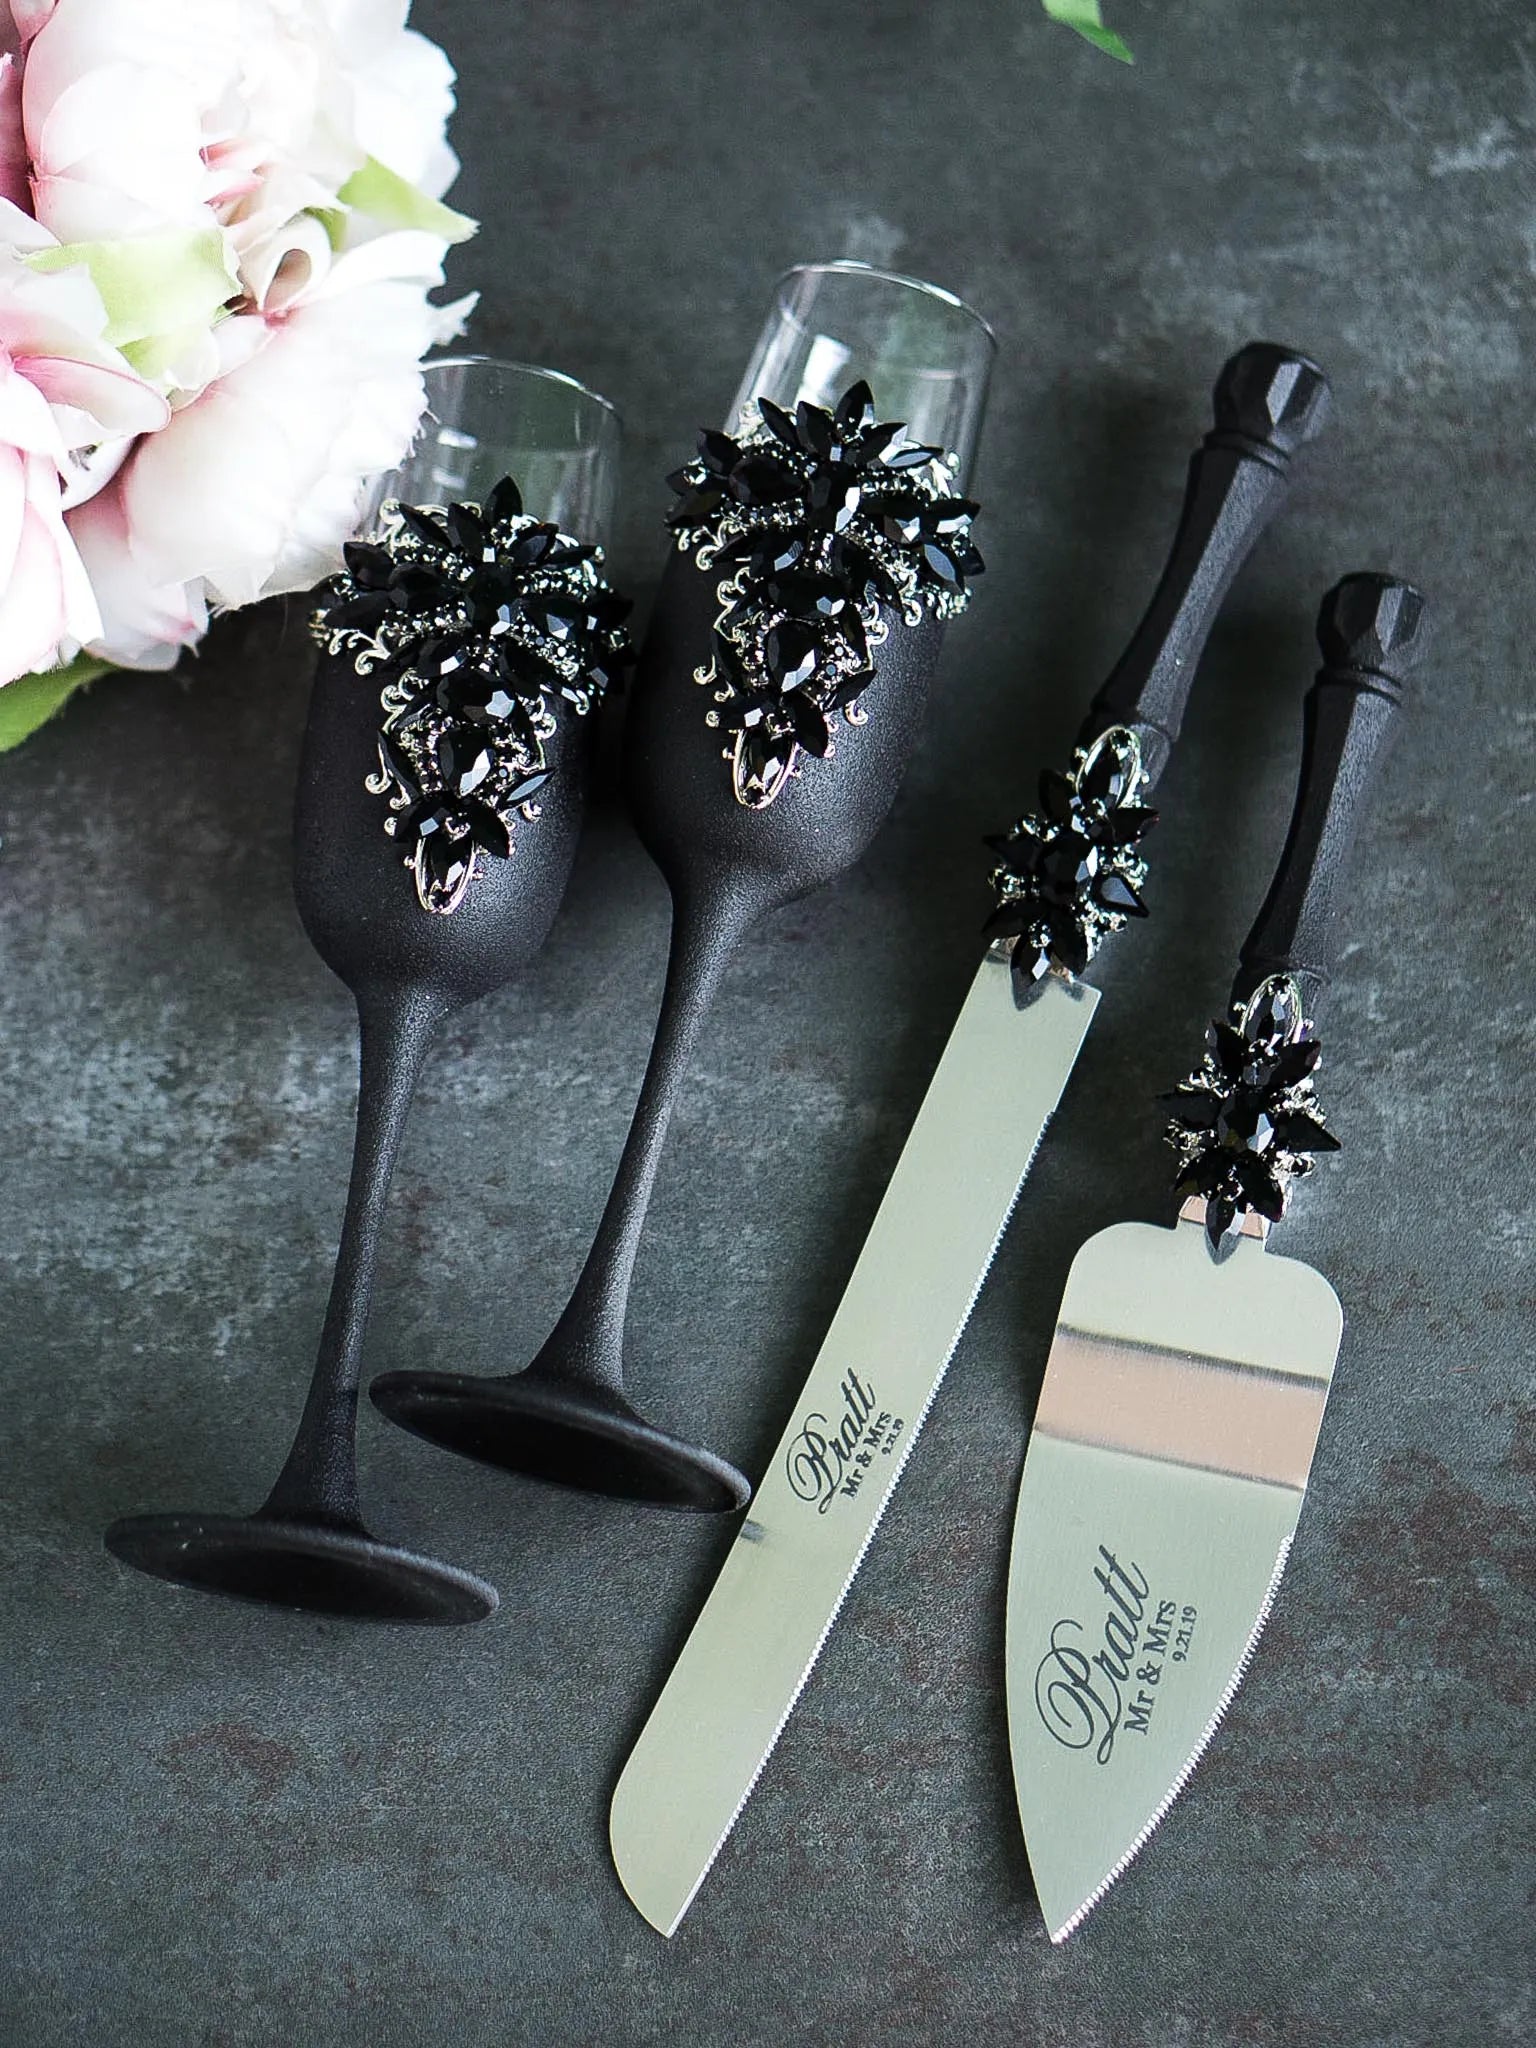 Customized cake knife and server with crystals